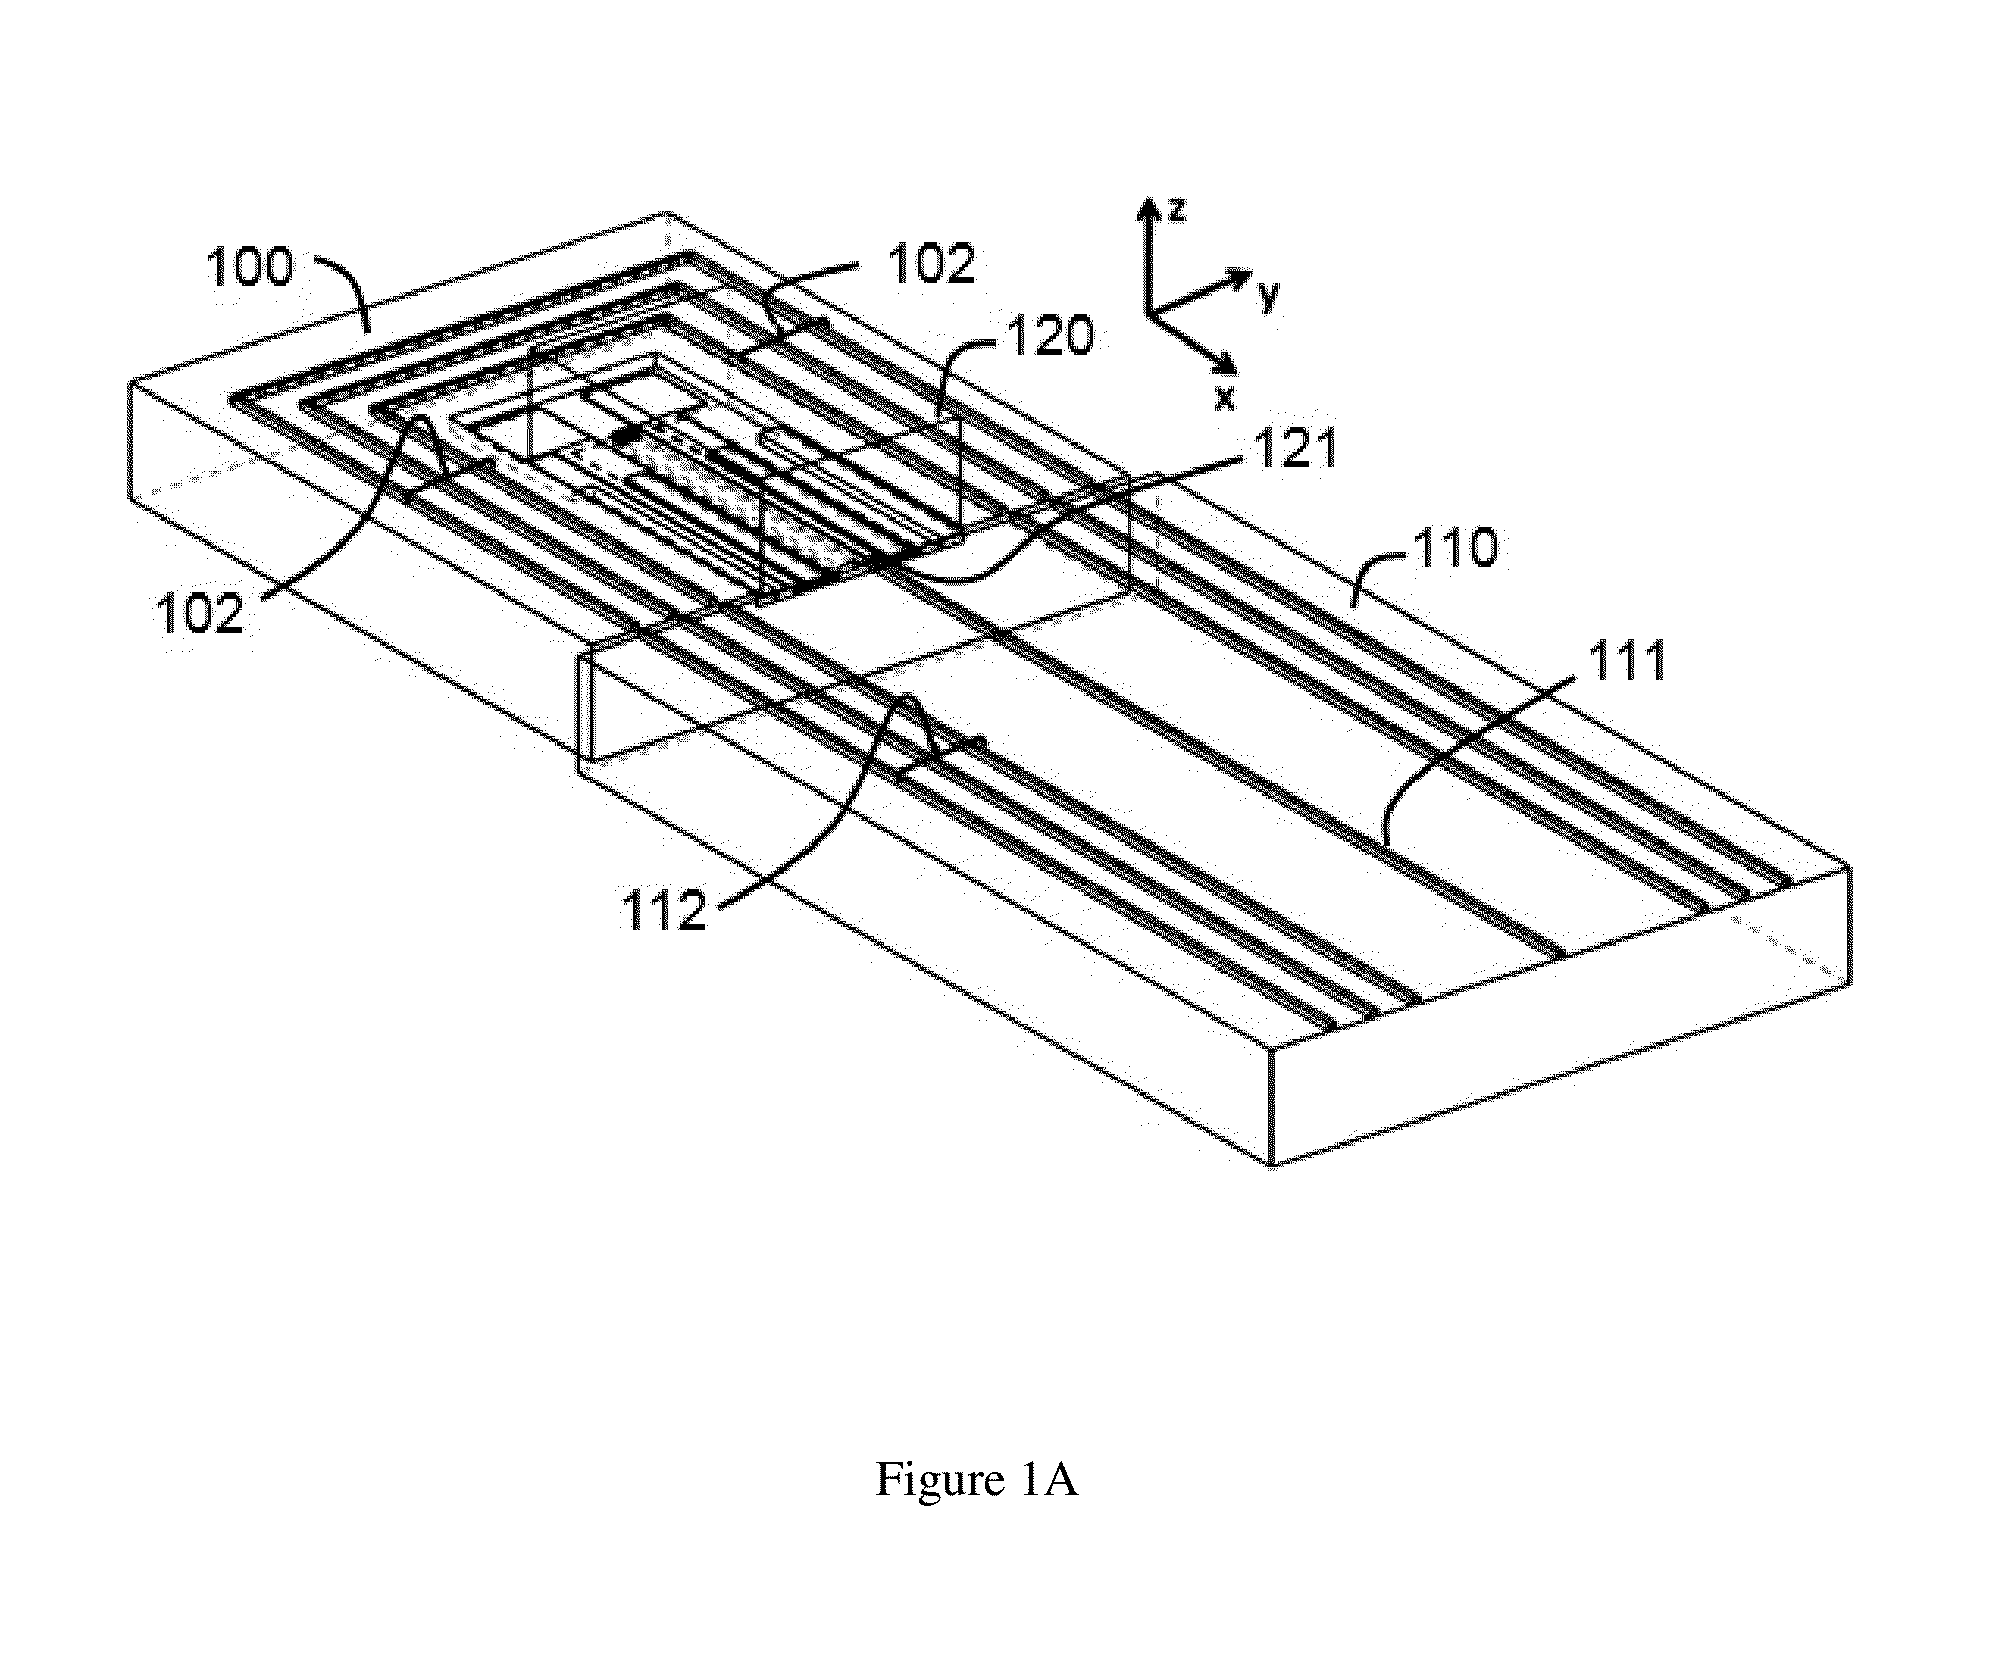 Hybrid integrated optical device with passively aligned laser chips having submicrometer alignment accuracy